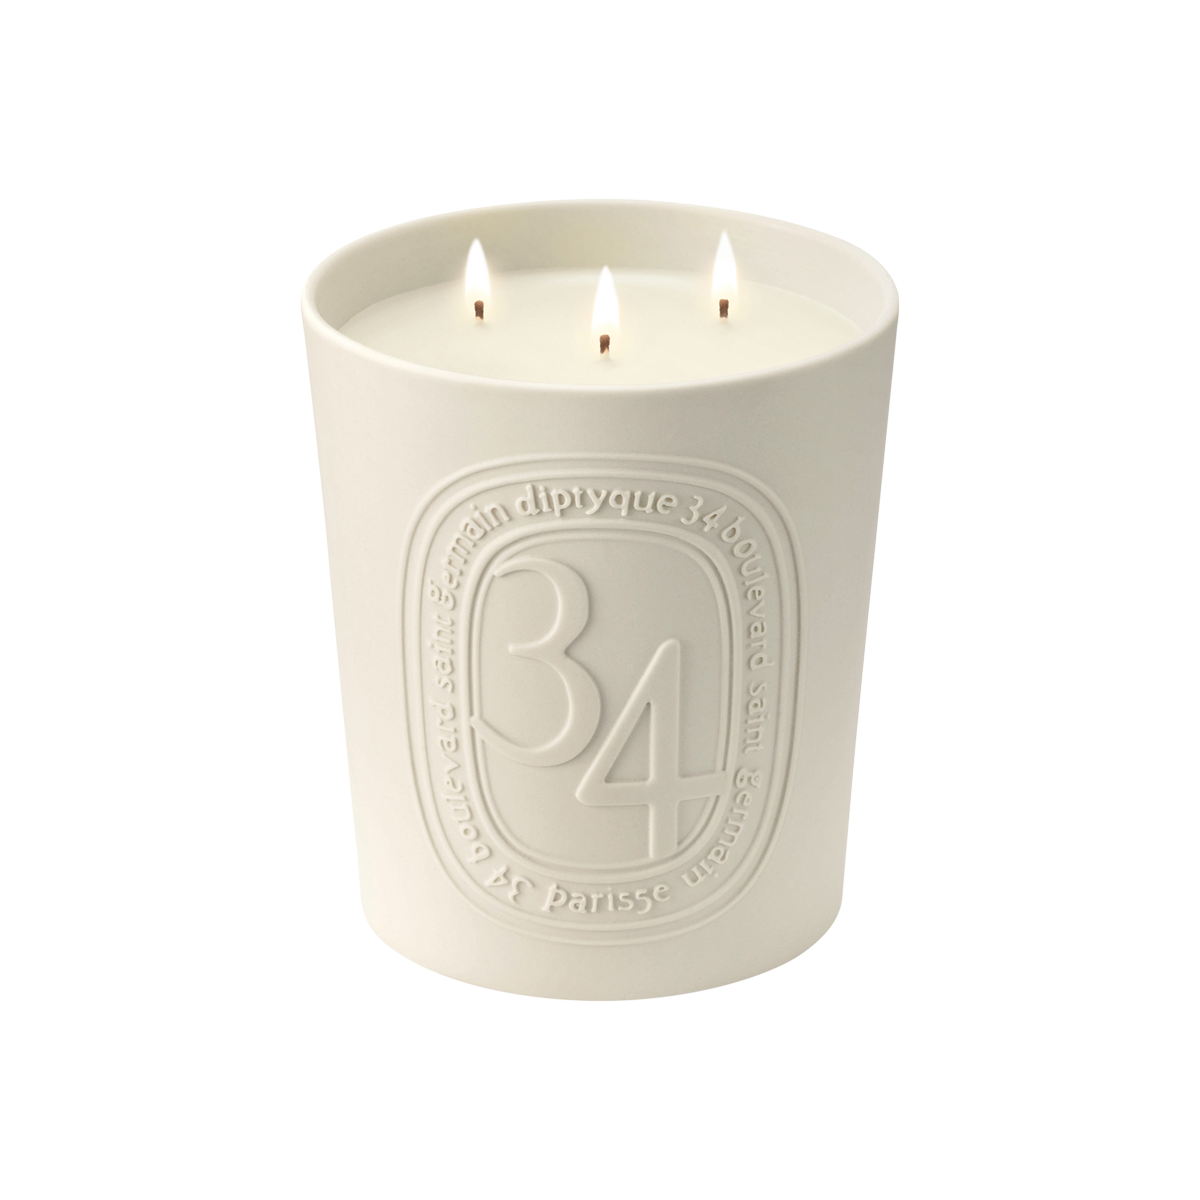 Diptyque - 34 Blvd Saint Germain Scented Candle